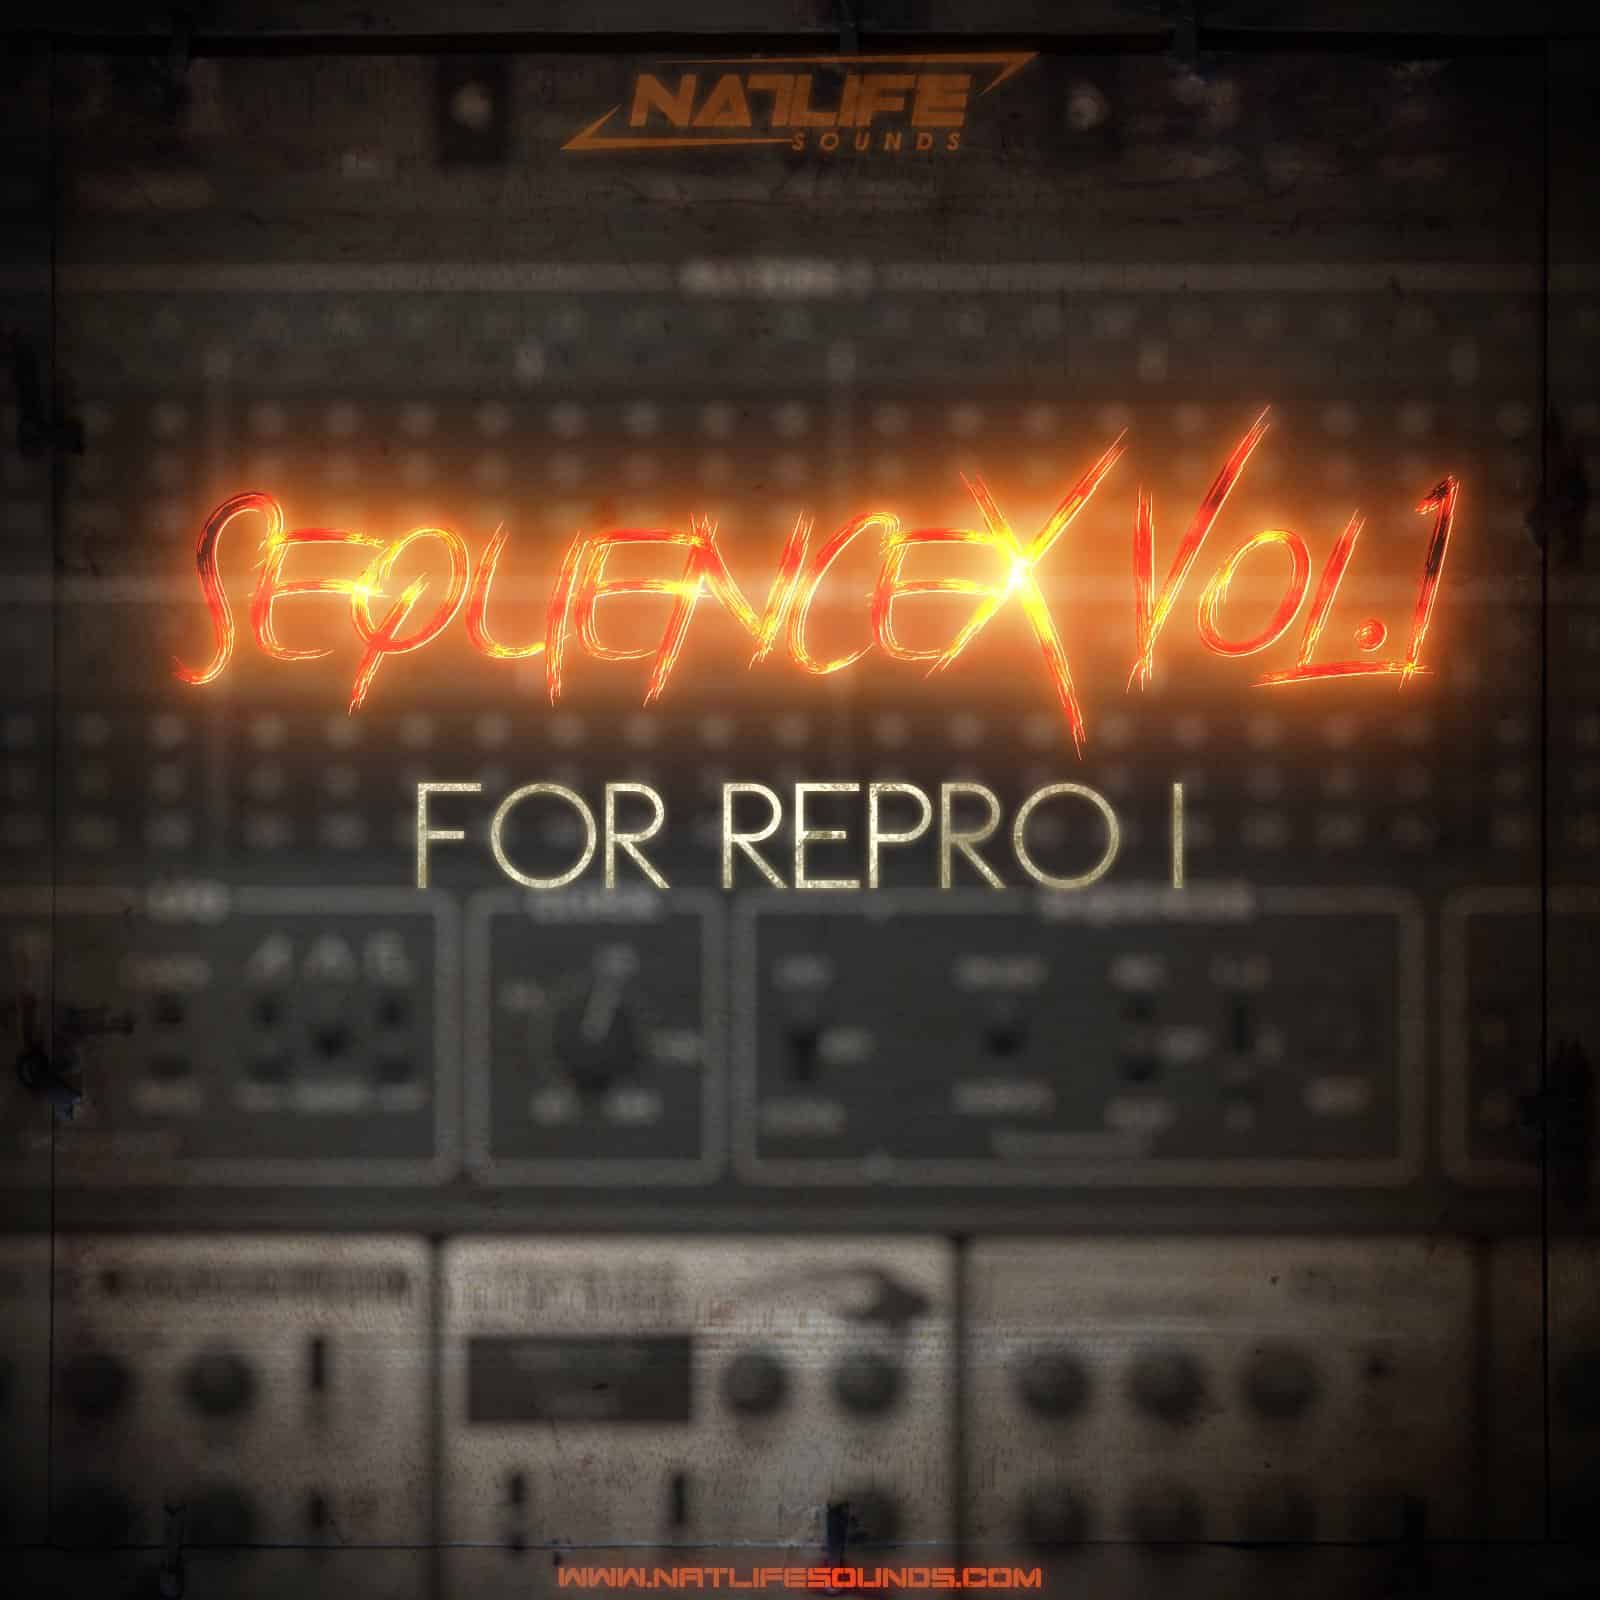 NatLife Sounds launches SequenceX Vol.1 for Repro 1